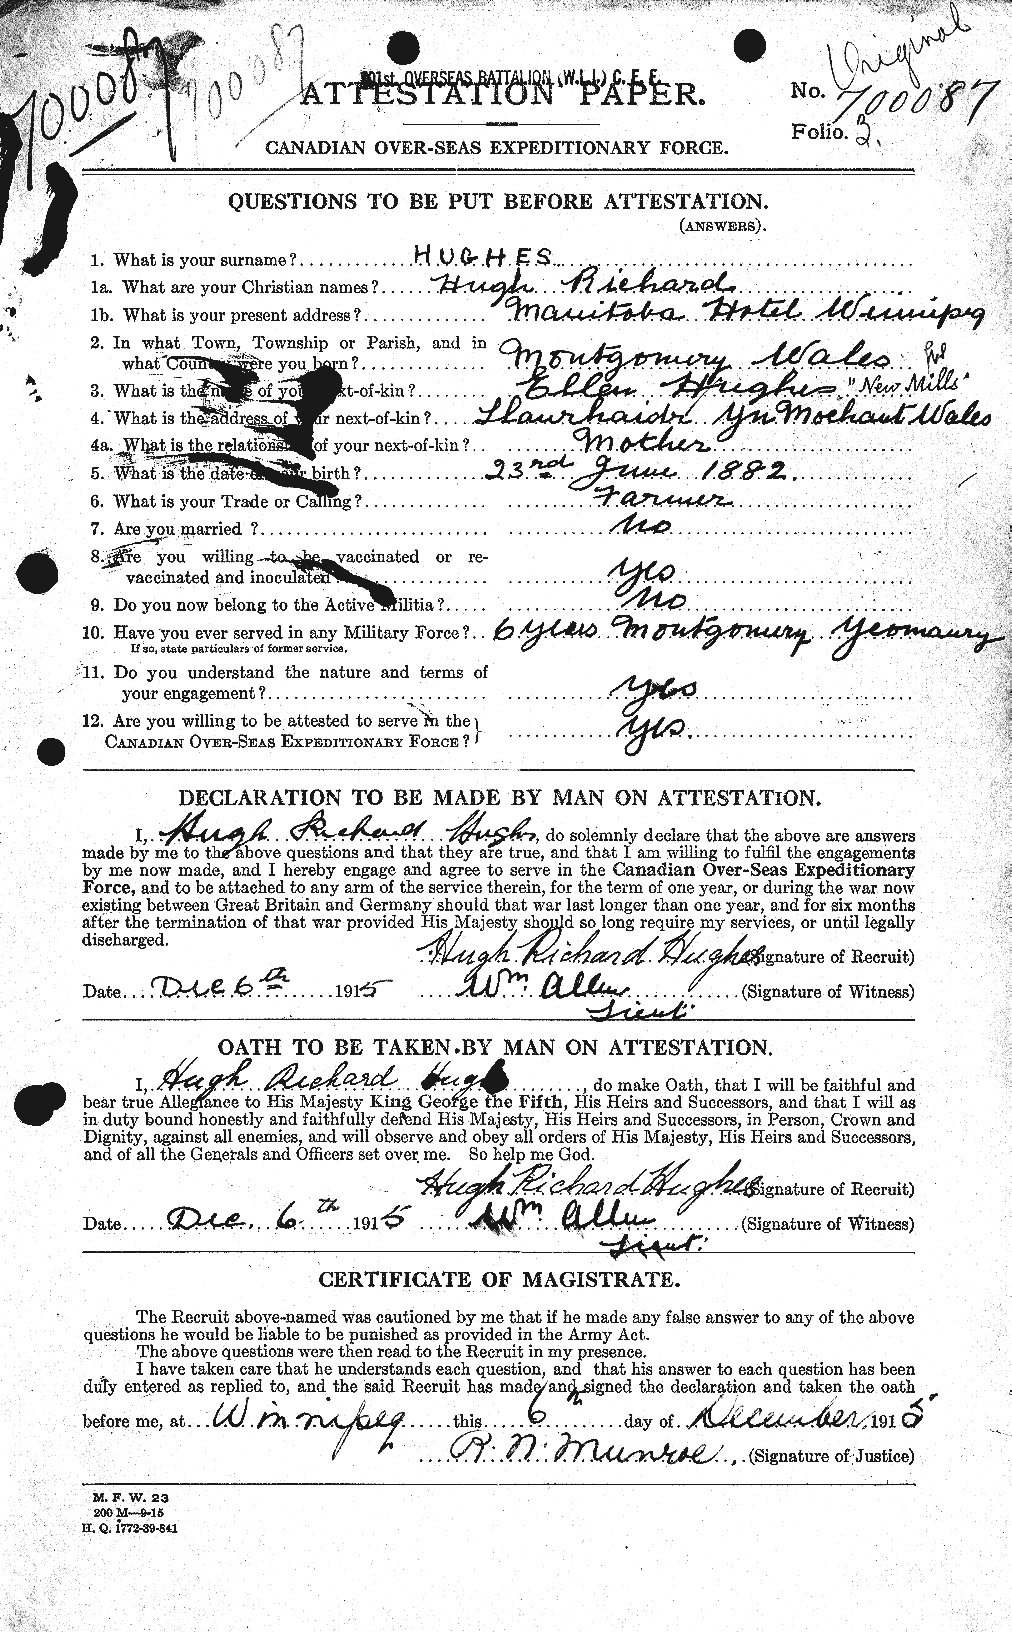 Personnel Records of the First World War - CEF 403927a